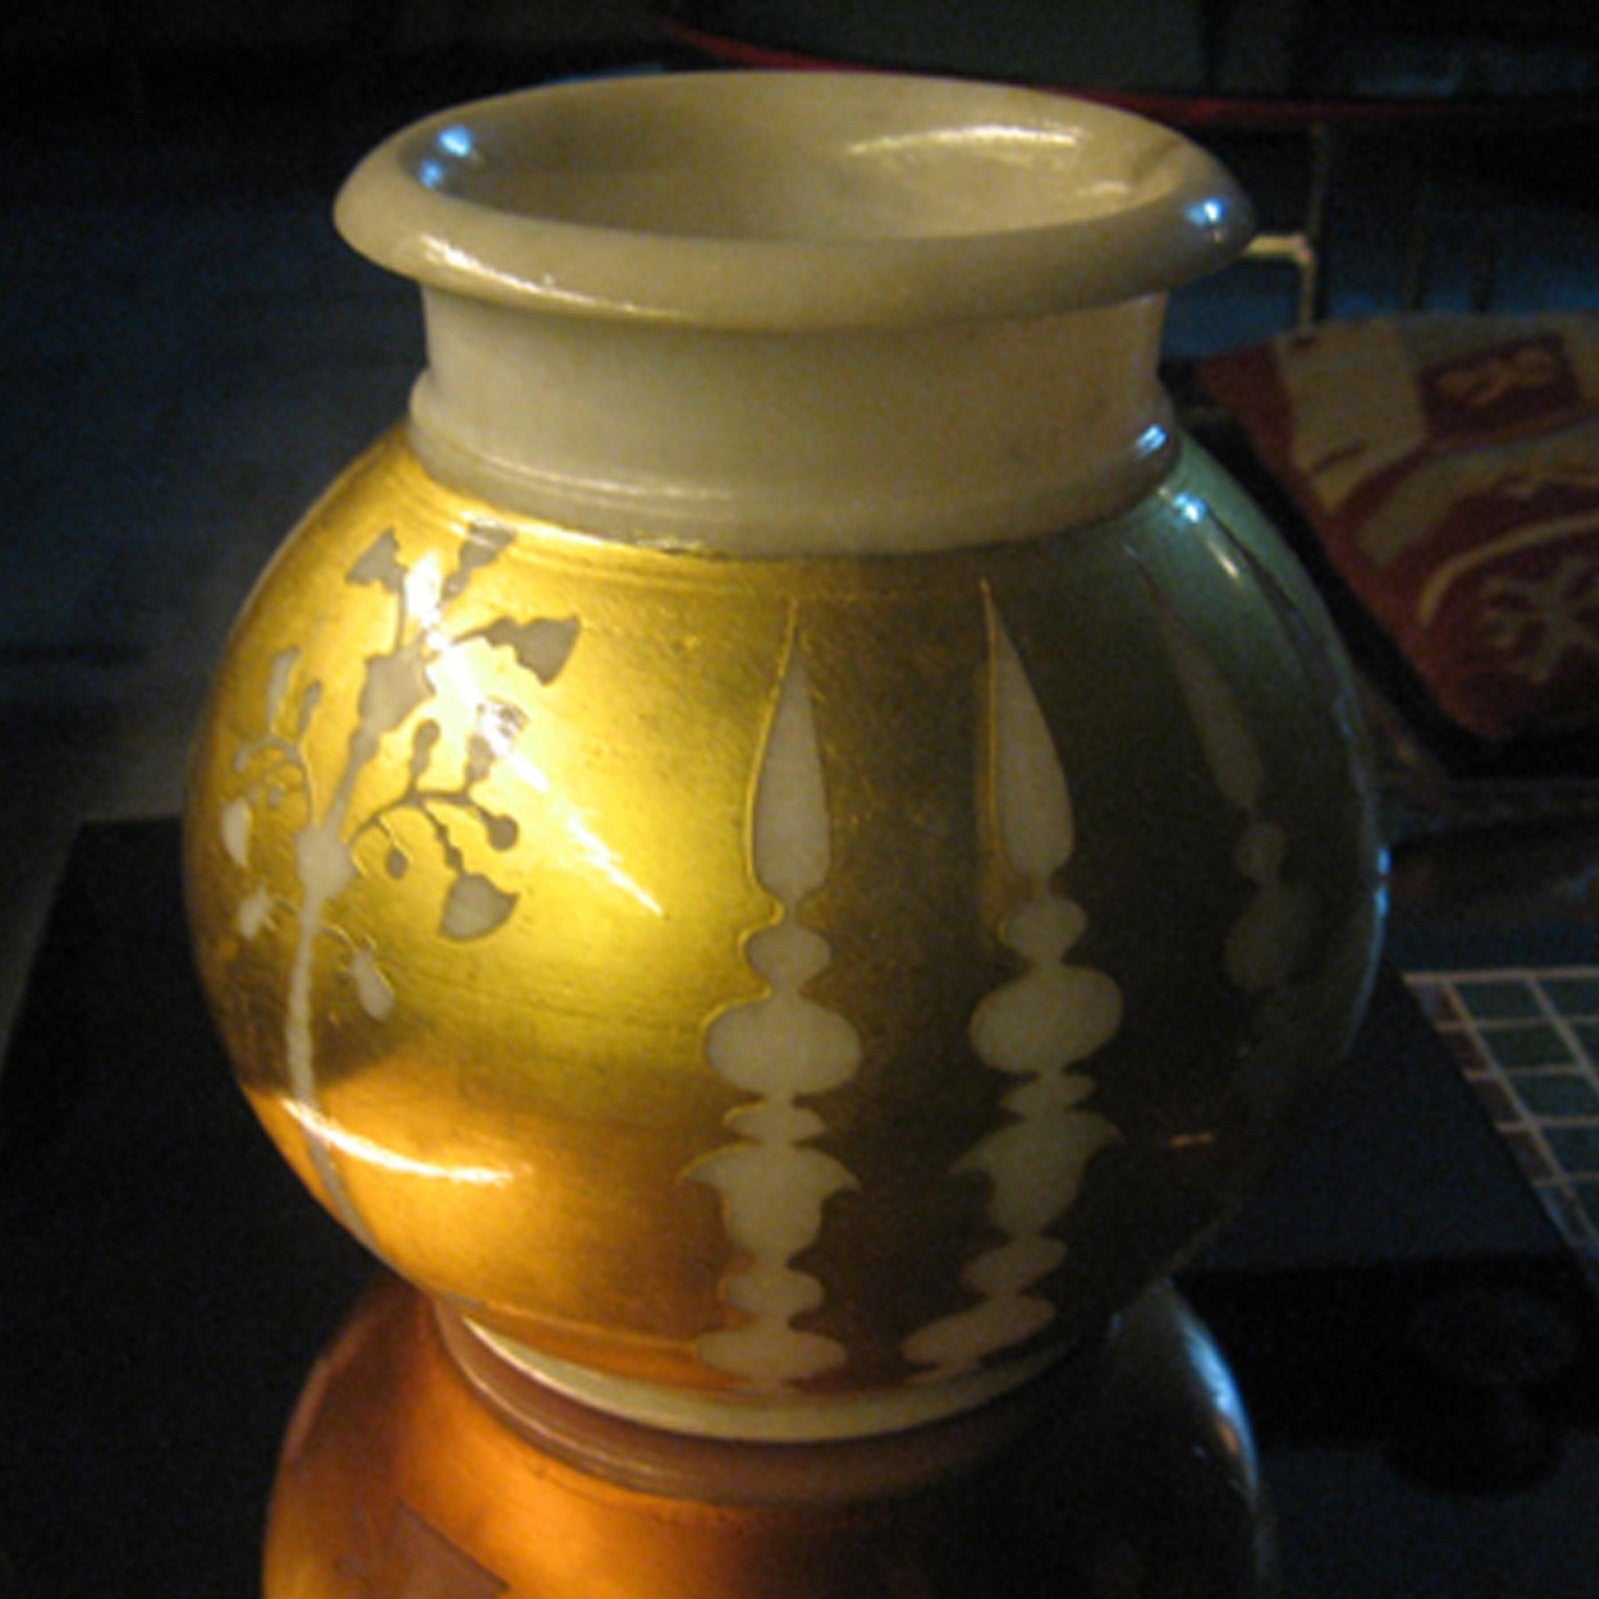 Home Objects , Lighting & Fragrances , Display, Vark vase, candle opaque, tealight